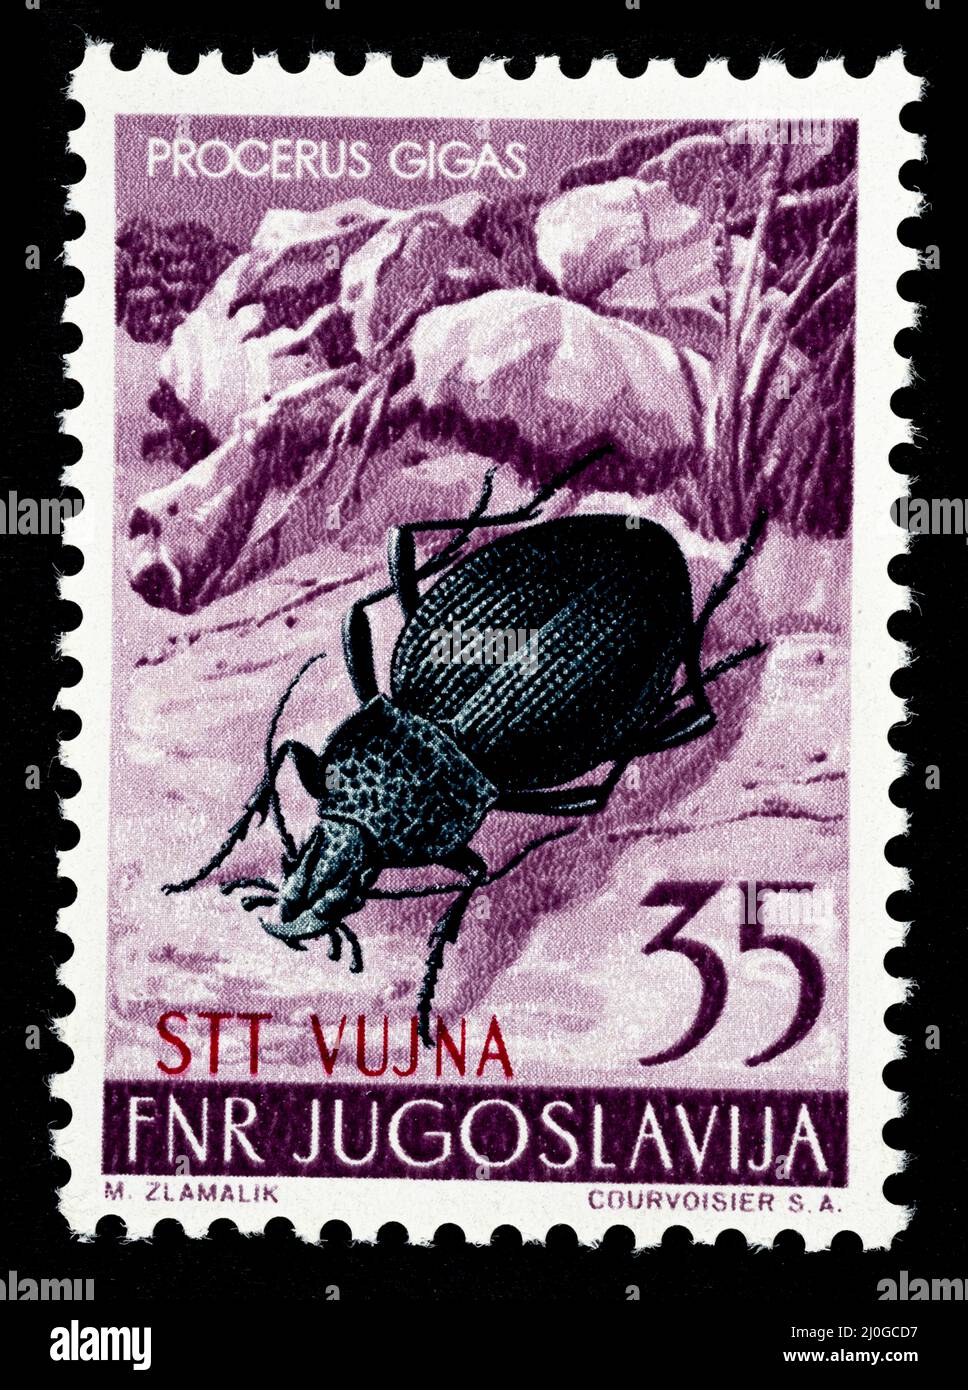 Commemorative postage stamp  with the illustration of a golden eagle - Procerus Gigas  issued by the  former Yugoslavia overprinted STT VUJNA, free te Stock Photo